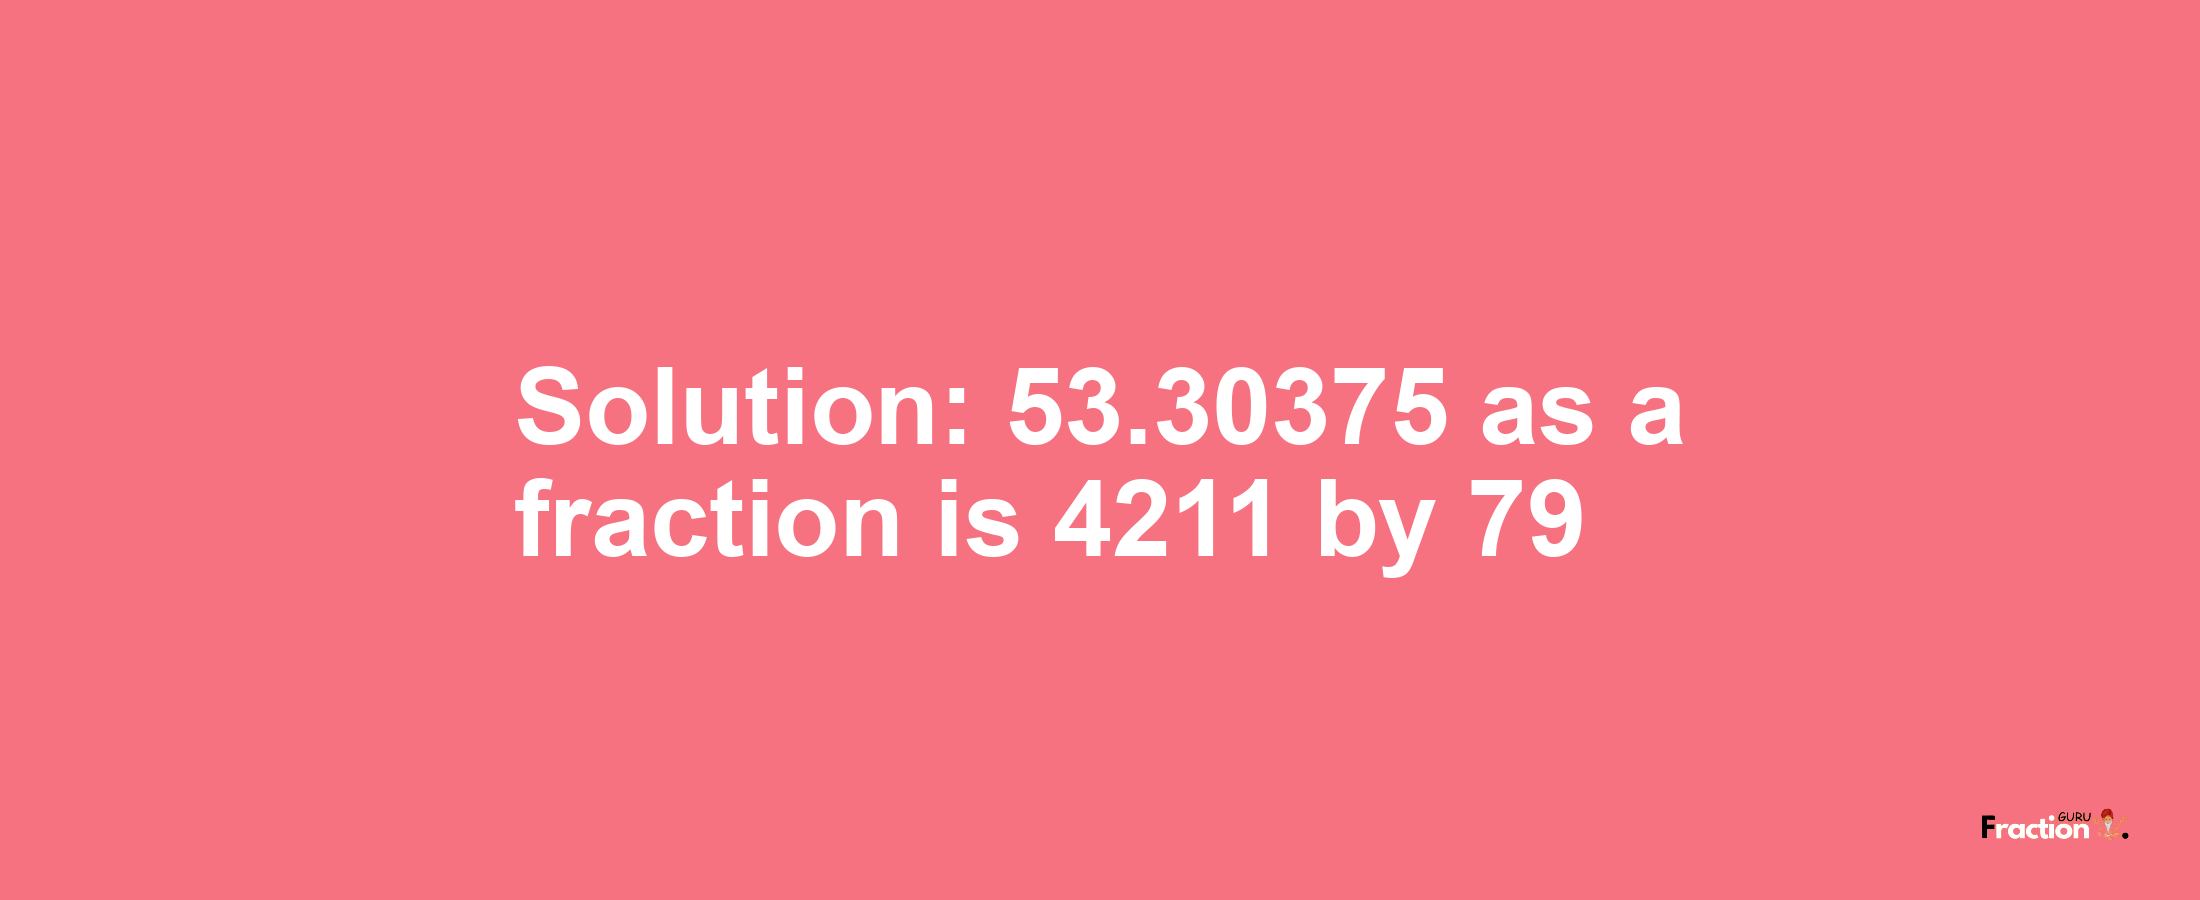 Solution:53.30375 as a fraction is 4211/79